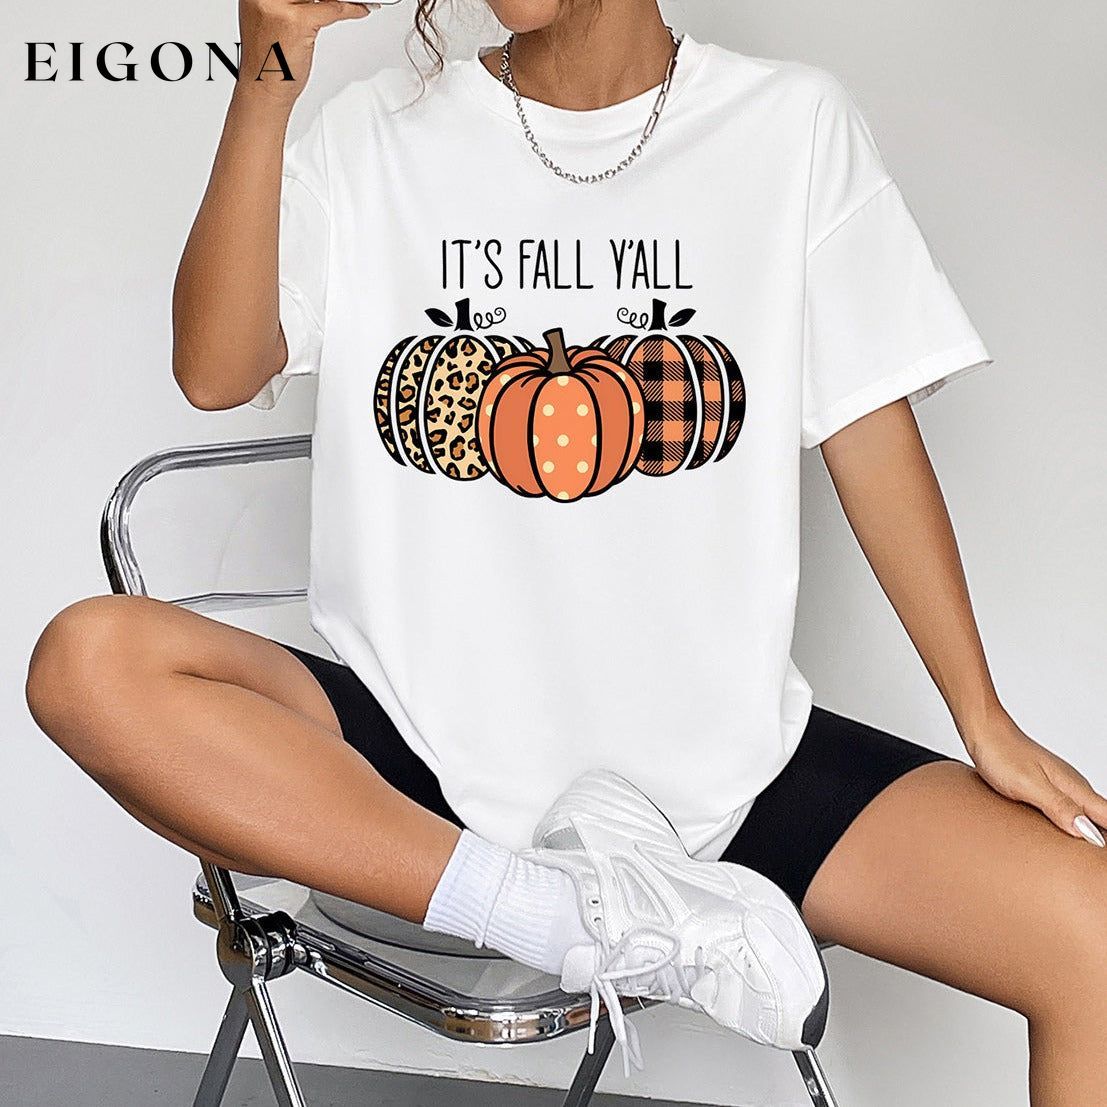 IT'S FALL Y'ALL Graphic T-Shirt clothes E@M@E Ship From Overseas Shipping Delay 09/29/2023 - 10/01/2023 trend